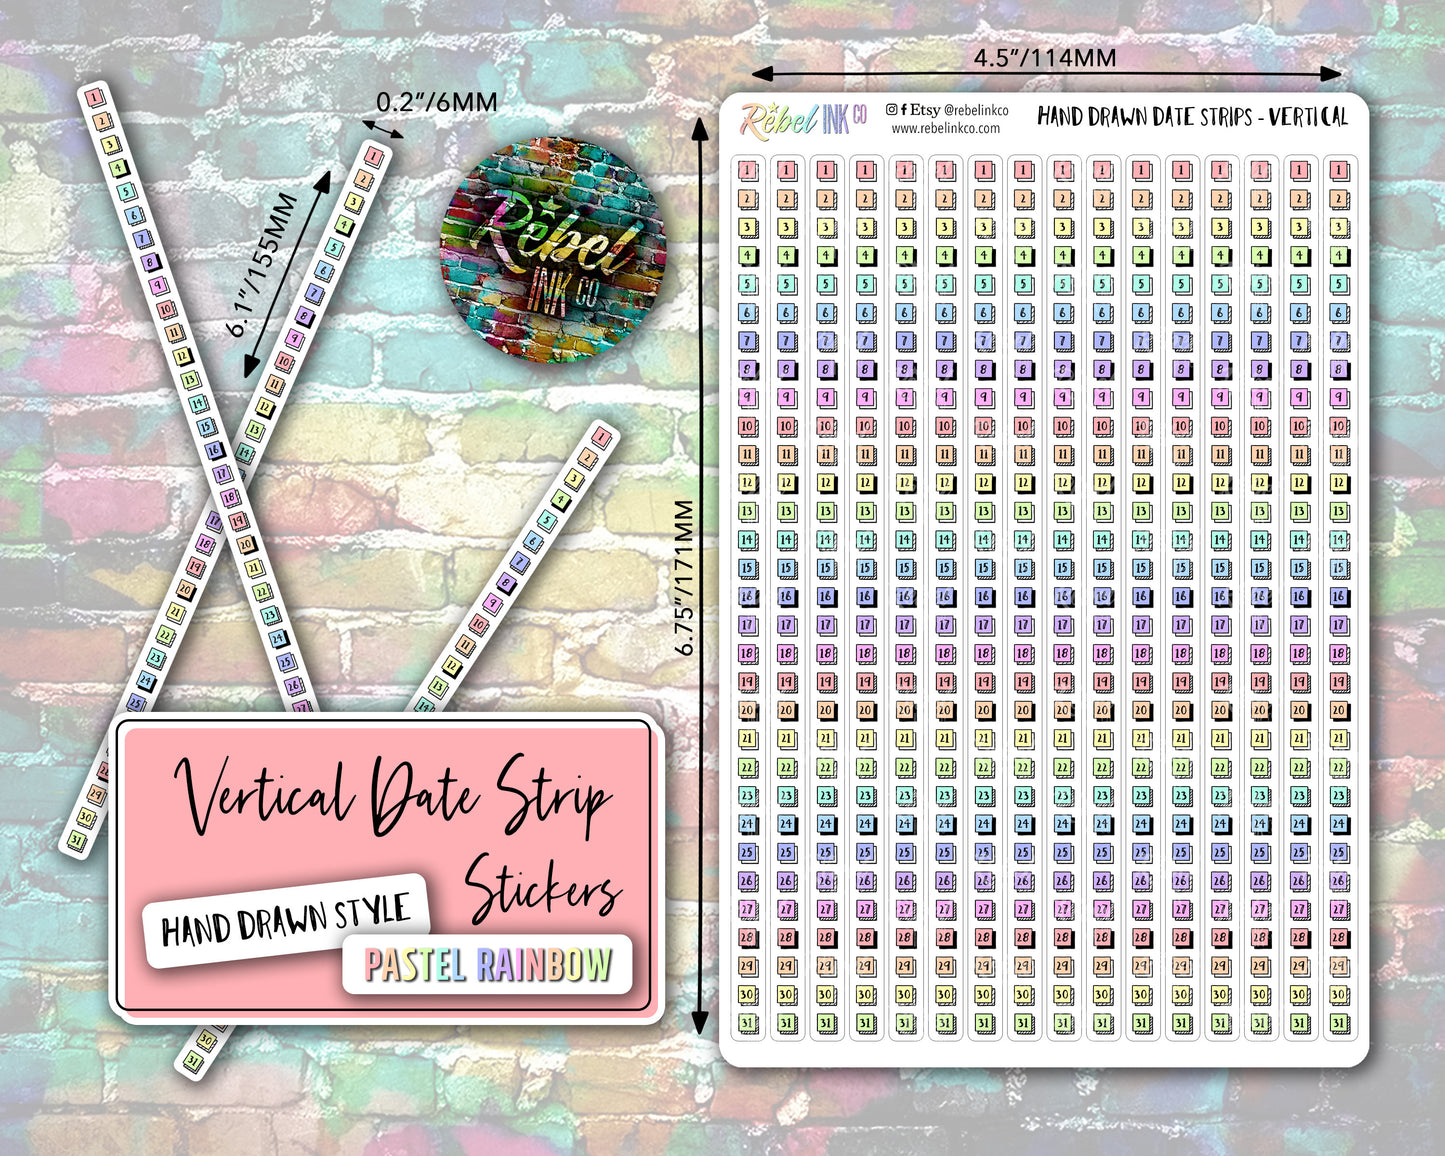 Vertical Date Strip Stickers - Pastel - Hand Drawn Style